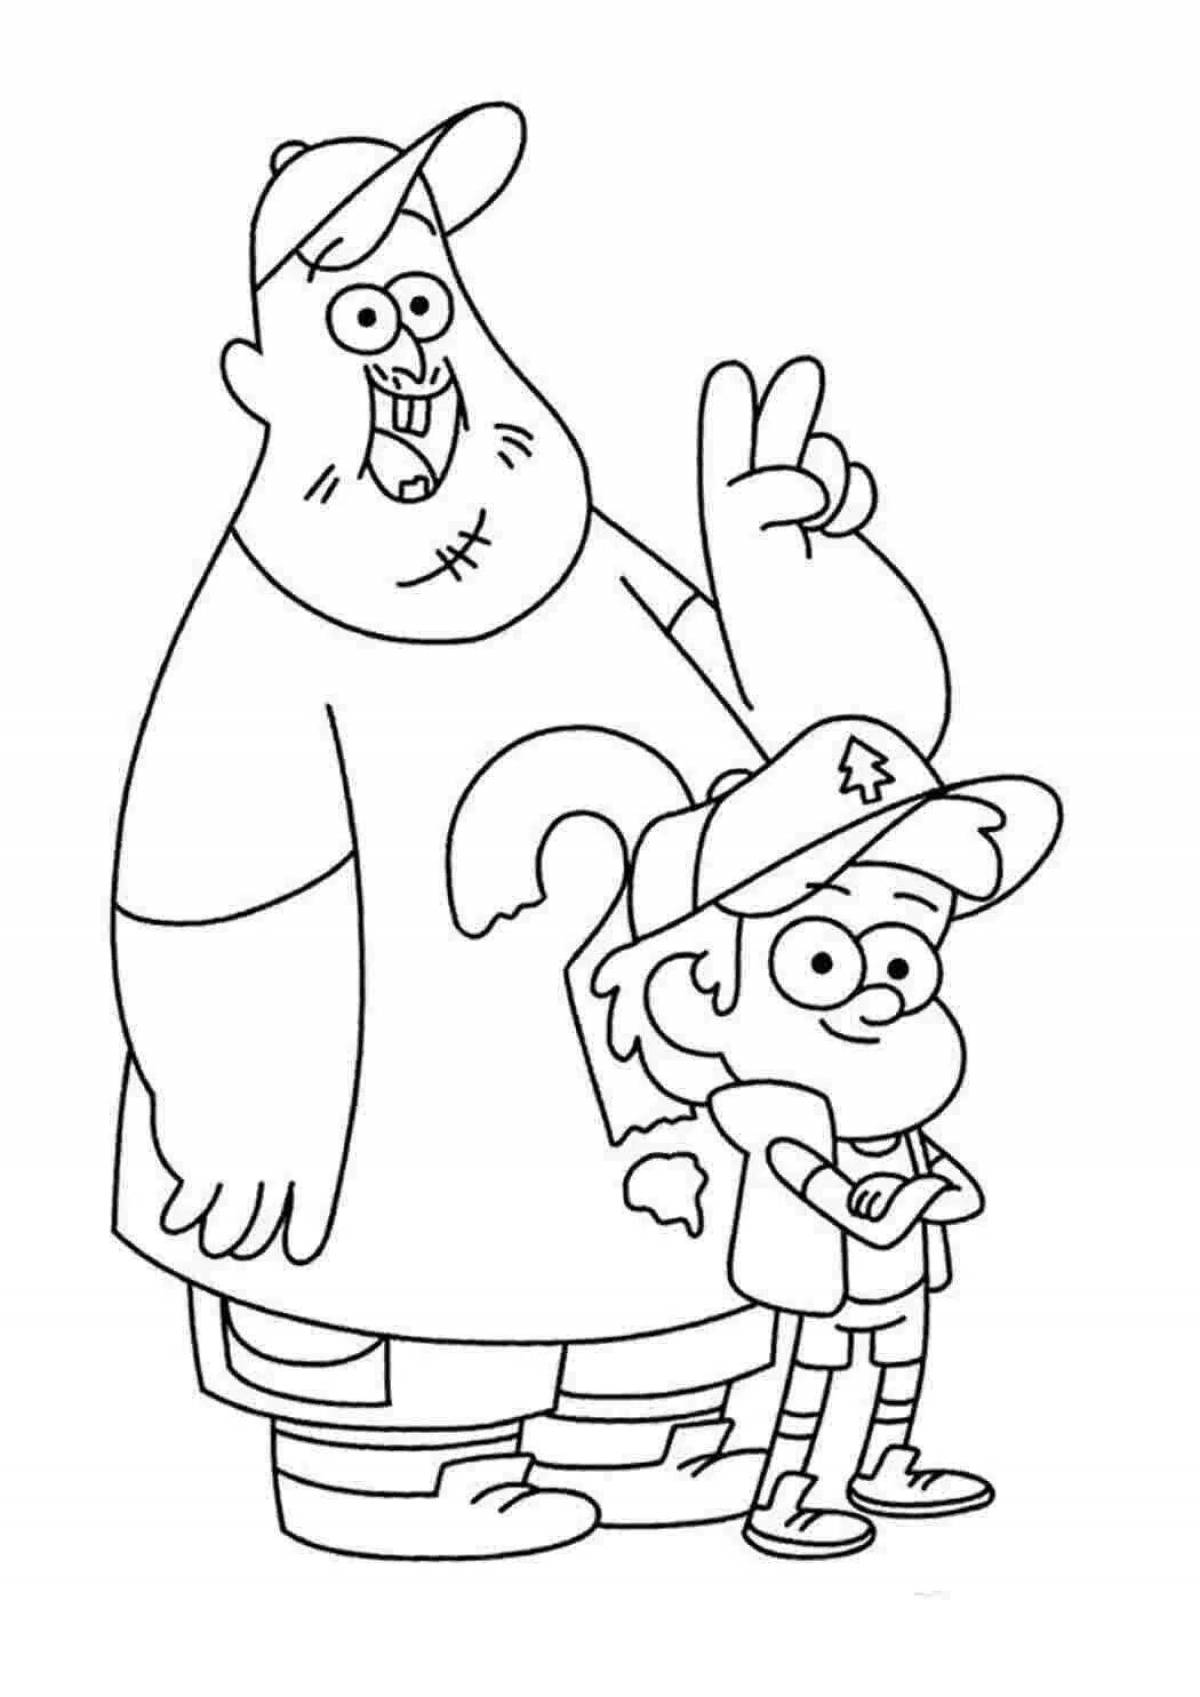 Amazing Gravity Falls coloring book for kids